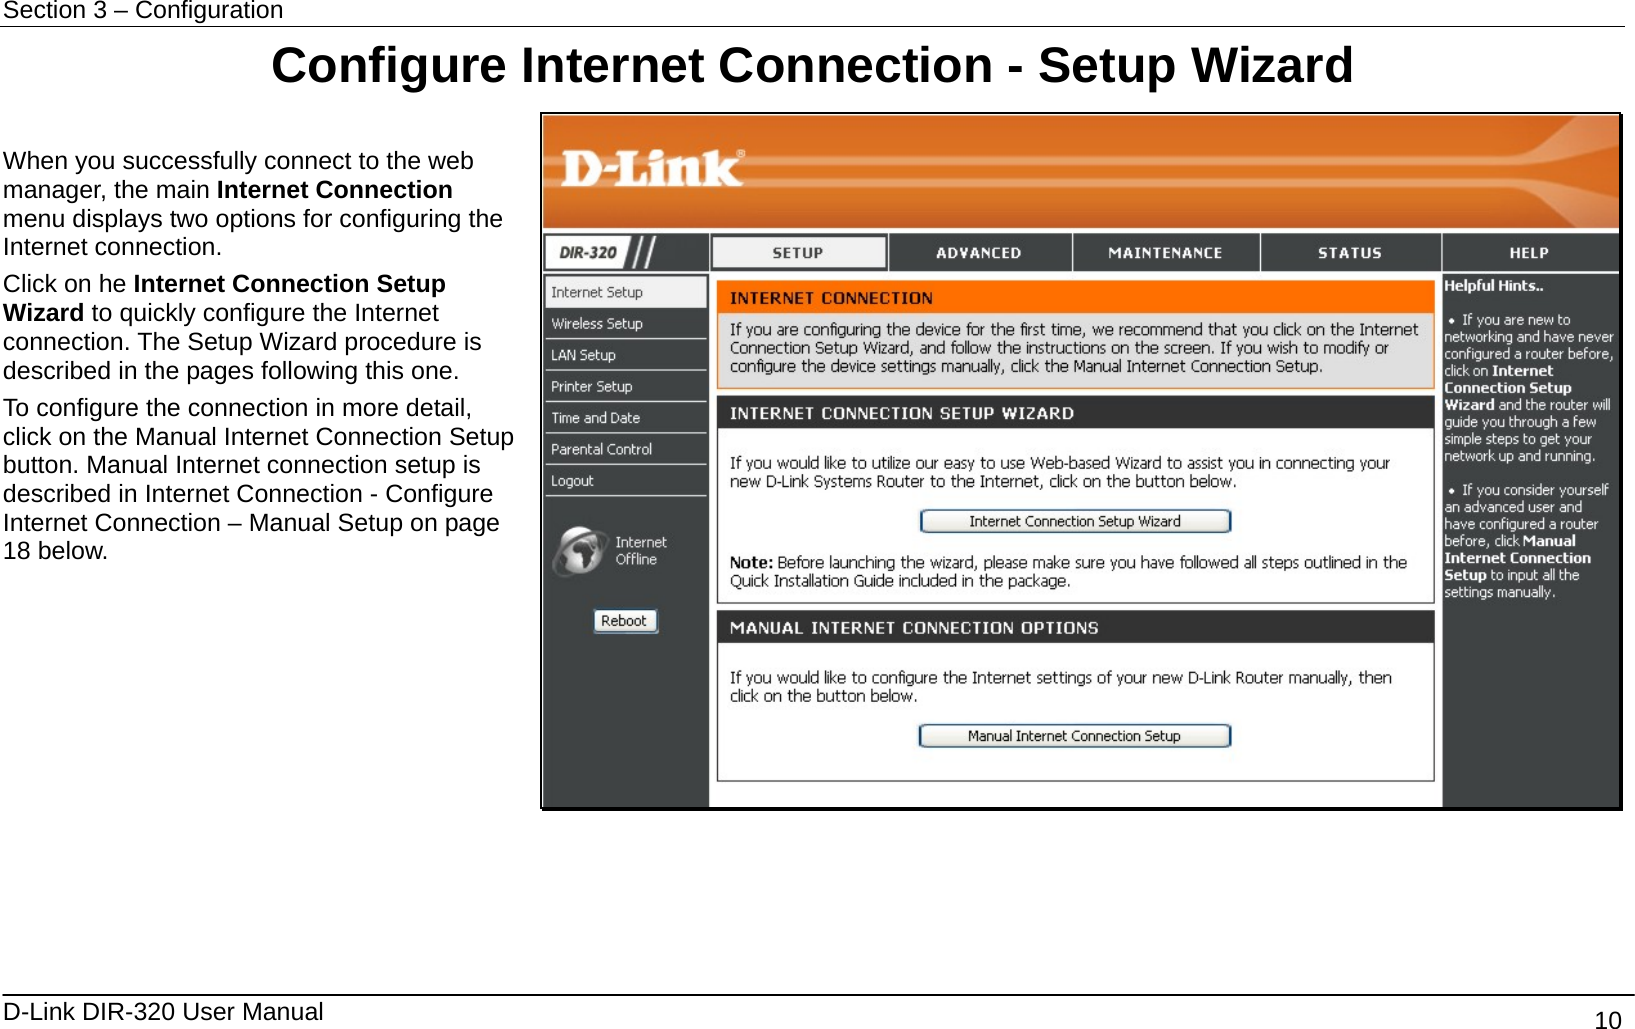 Section 3 – Configuration   D-Link DIR-320 User Manual                                       10 Configure Internet Connection - Setup Wizard  When you successfully connect to the web manager, the main Internet Connection menu displays two options for configuring the Internet connection.   Click on he Internet Connection Setup Wizard to quickly configure the Internet connection. The Setup Wizard procedure is described in the pages following this one.   To configure the connection in more detail, click on the Manual Internet Connection Setup button. Manual Internet connection setup is described in Internet Connection - Configure Internet Connection – Manual Setup on page 18 below.     